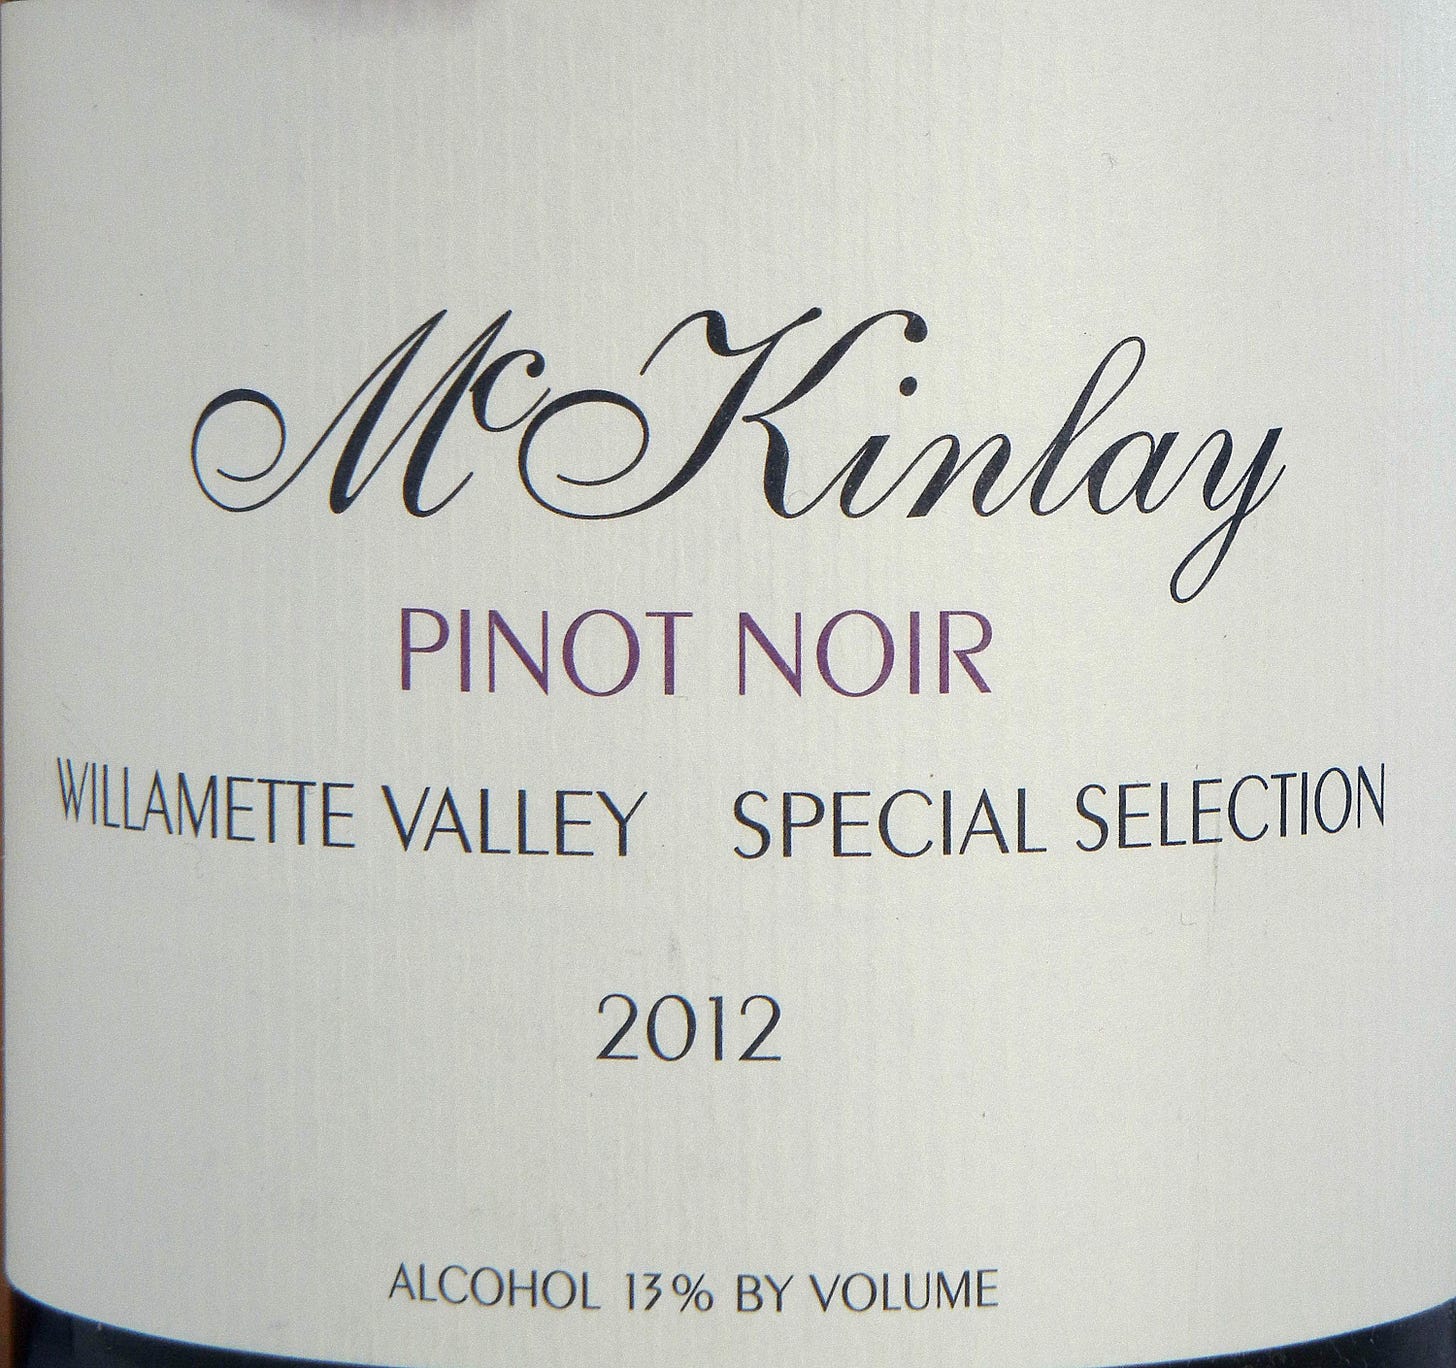 McKinlay Willamette Valley Pinot Noir 2012 Label - BC Pinot Noir Tasting Review 19 